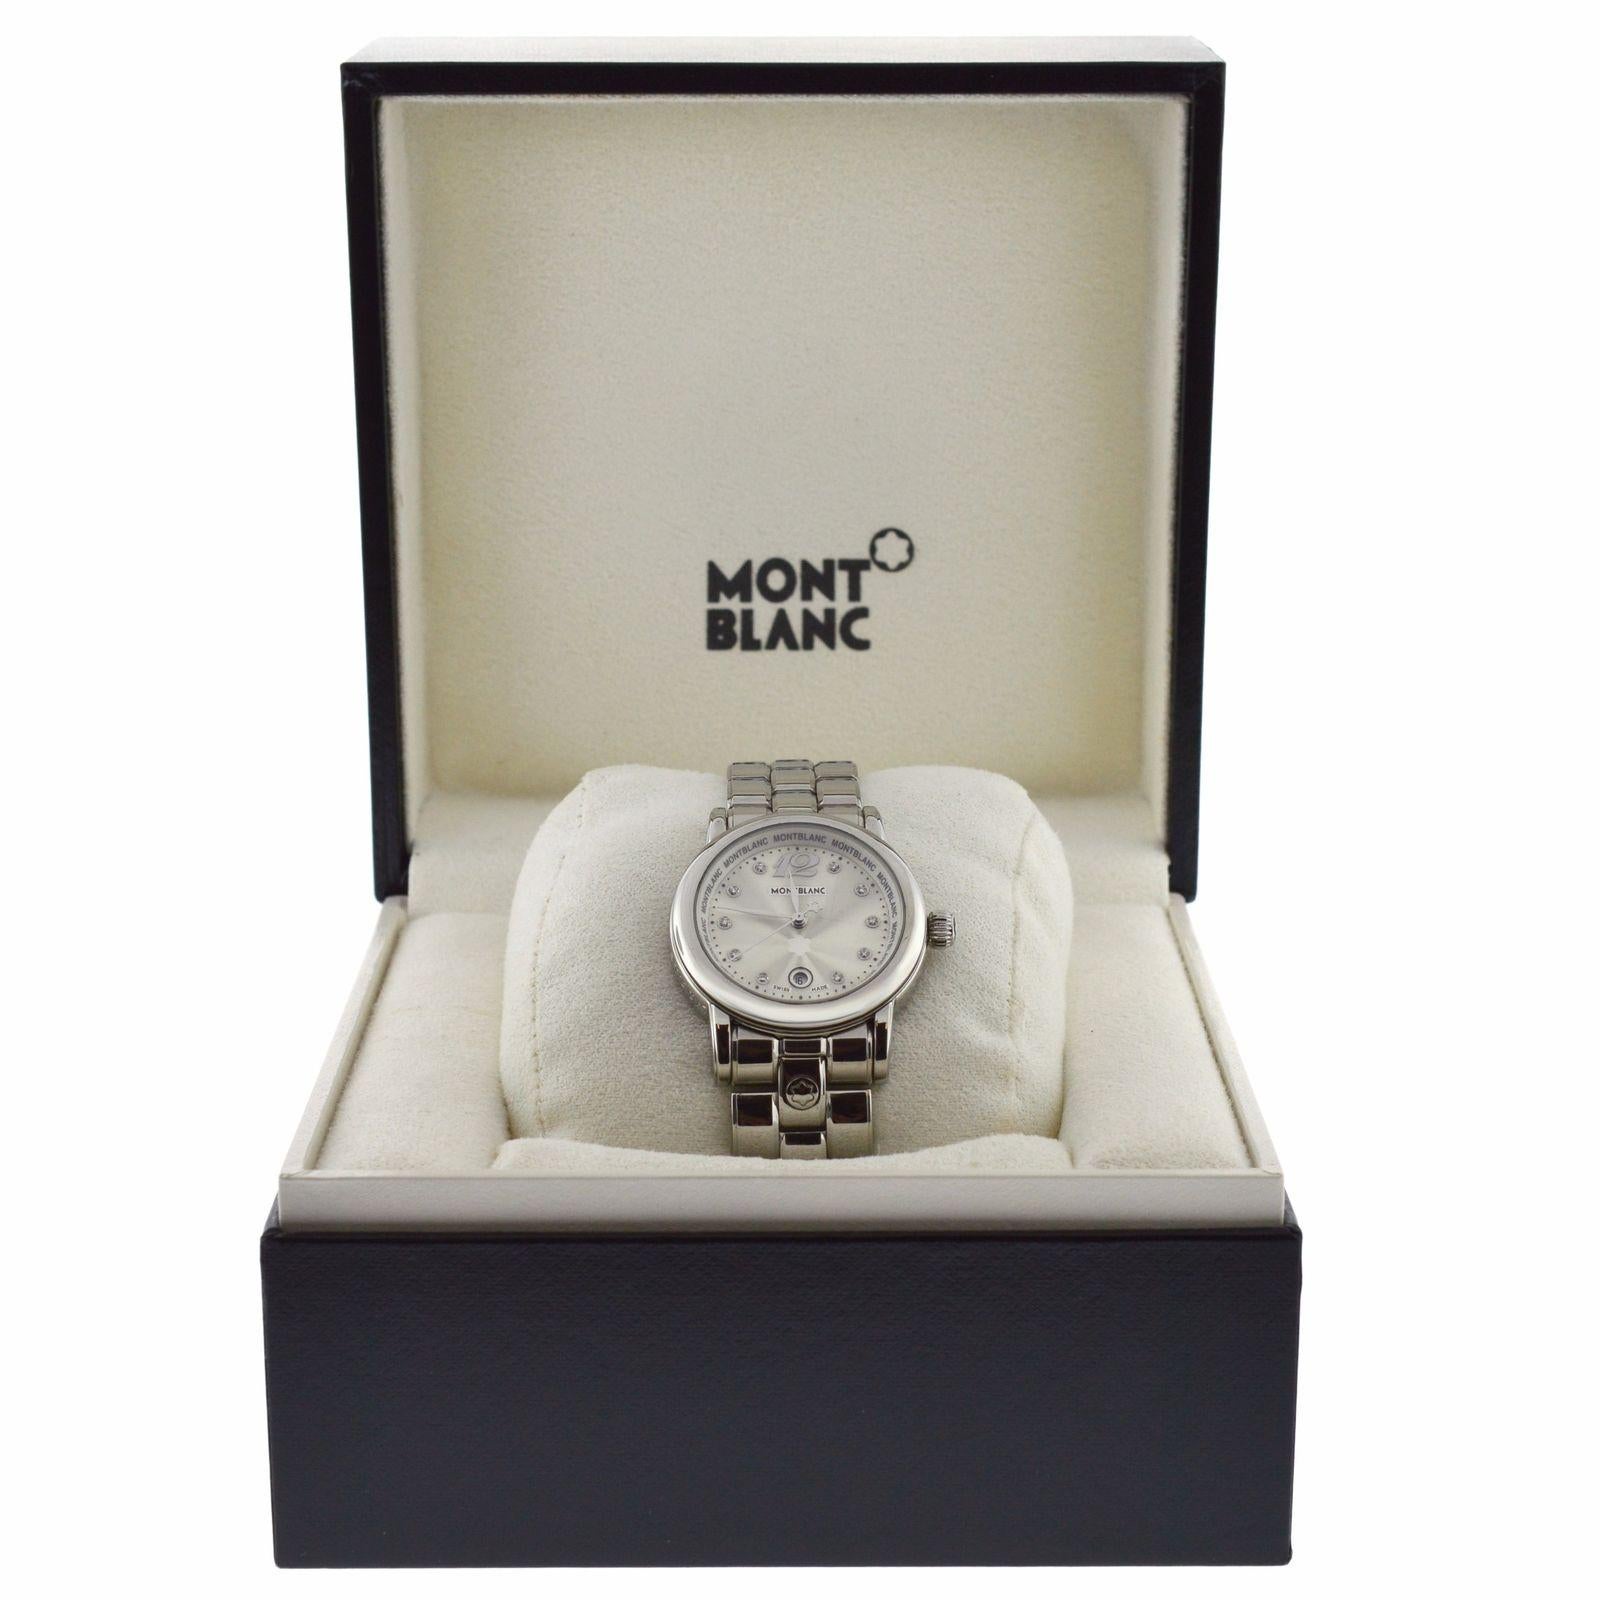 Brand	Montblanc
Model	Meisterstuck 7079
Gender	Ladies
Condition	Pre-owned
Movement	Swiss Quartz
Case Material	Stainless Steel
Bracelet / Strap Material	
Stainless Steel

Clasp / Buckle Material	
Stainless Steel

Clasp Type	Butterfly